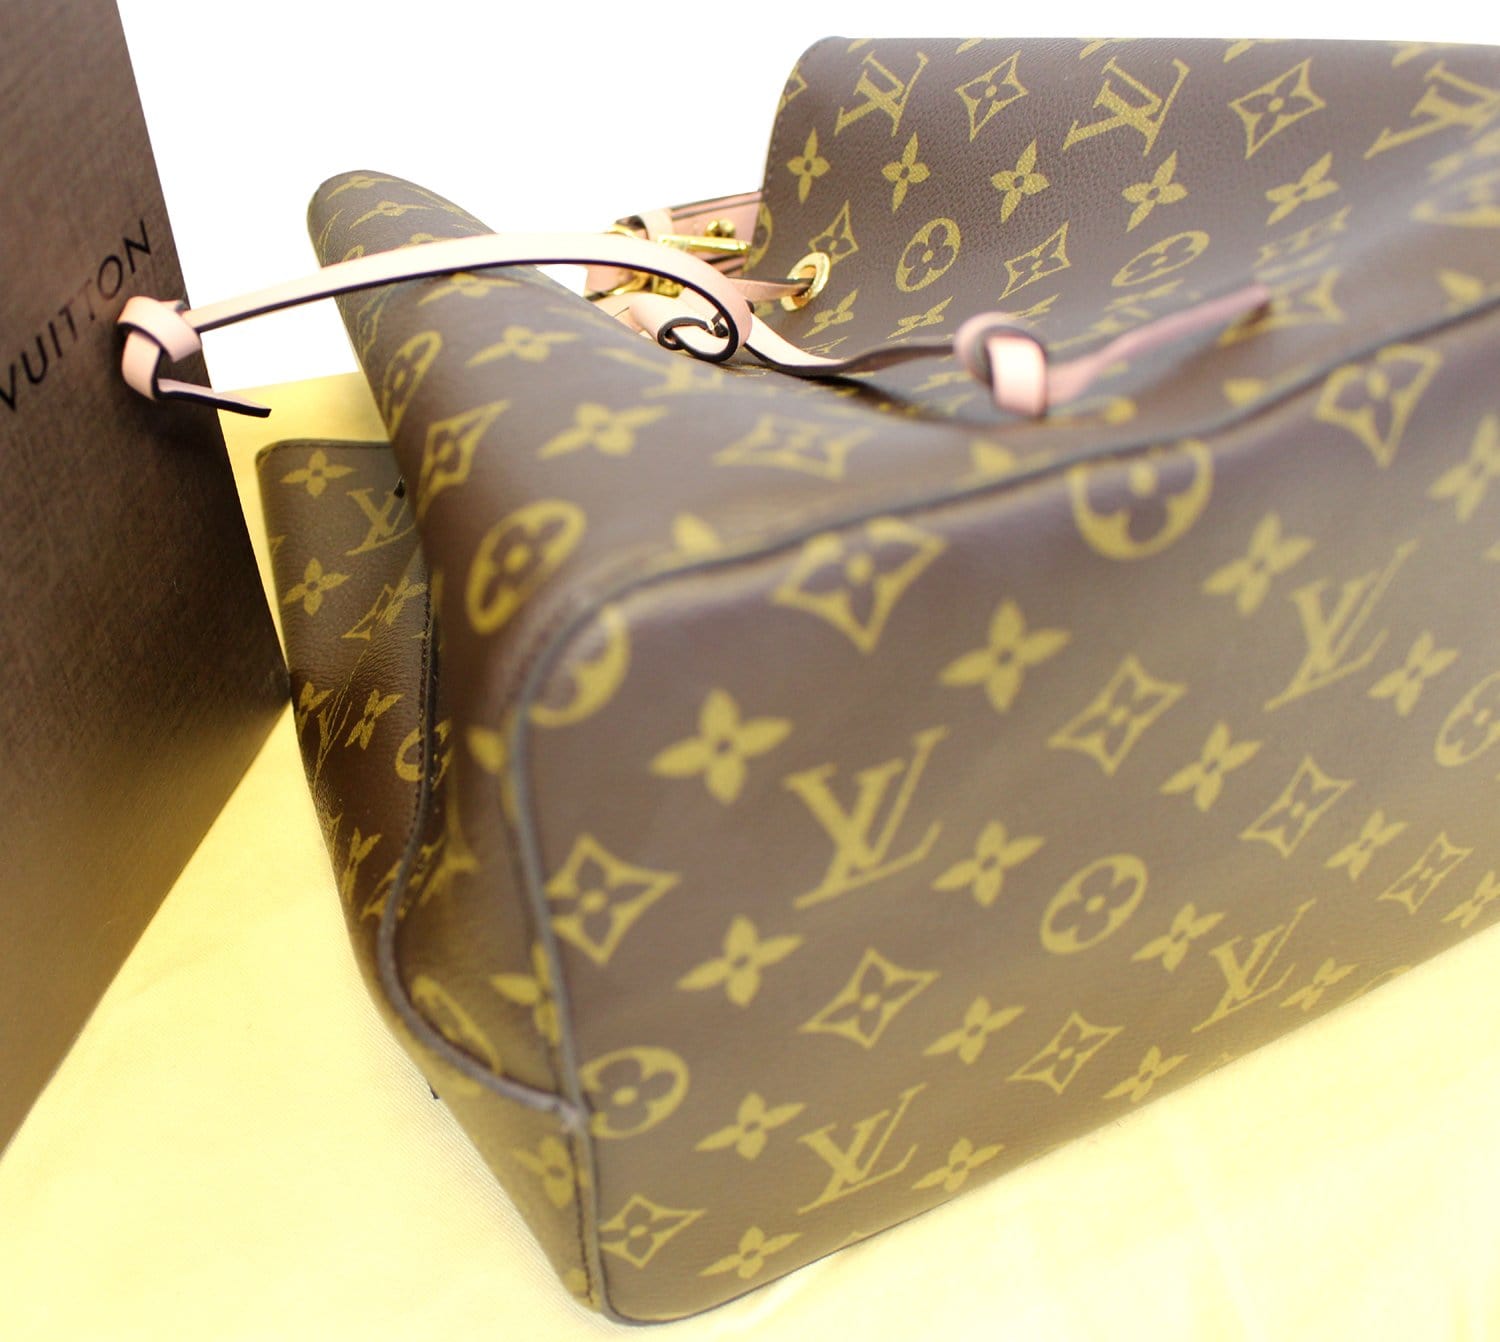  Louis Vuitton, Pre-Loved Monogram Canvas Neo Neverfull